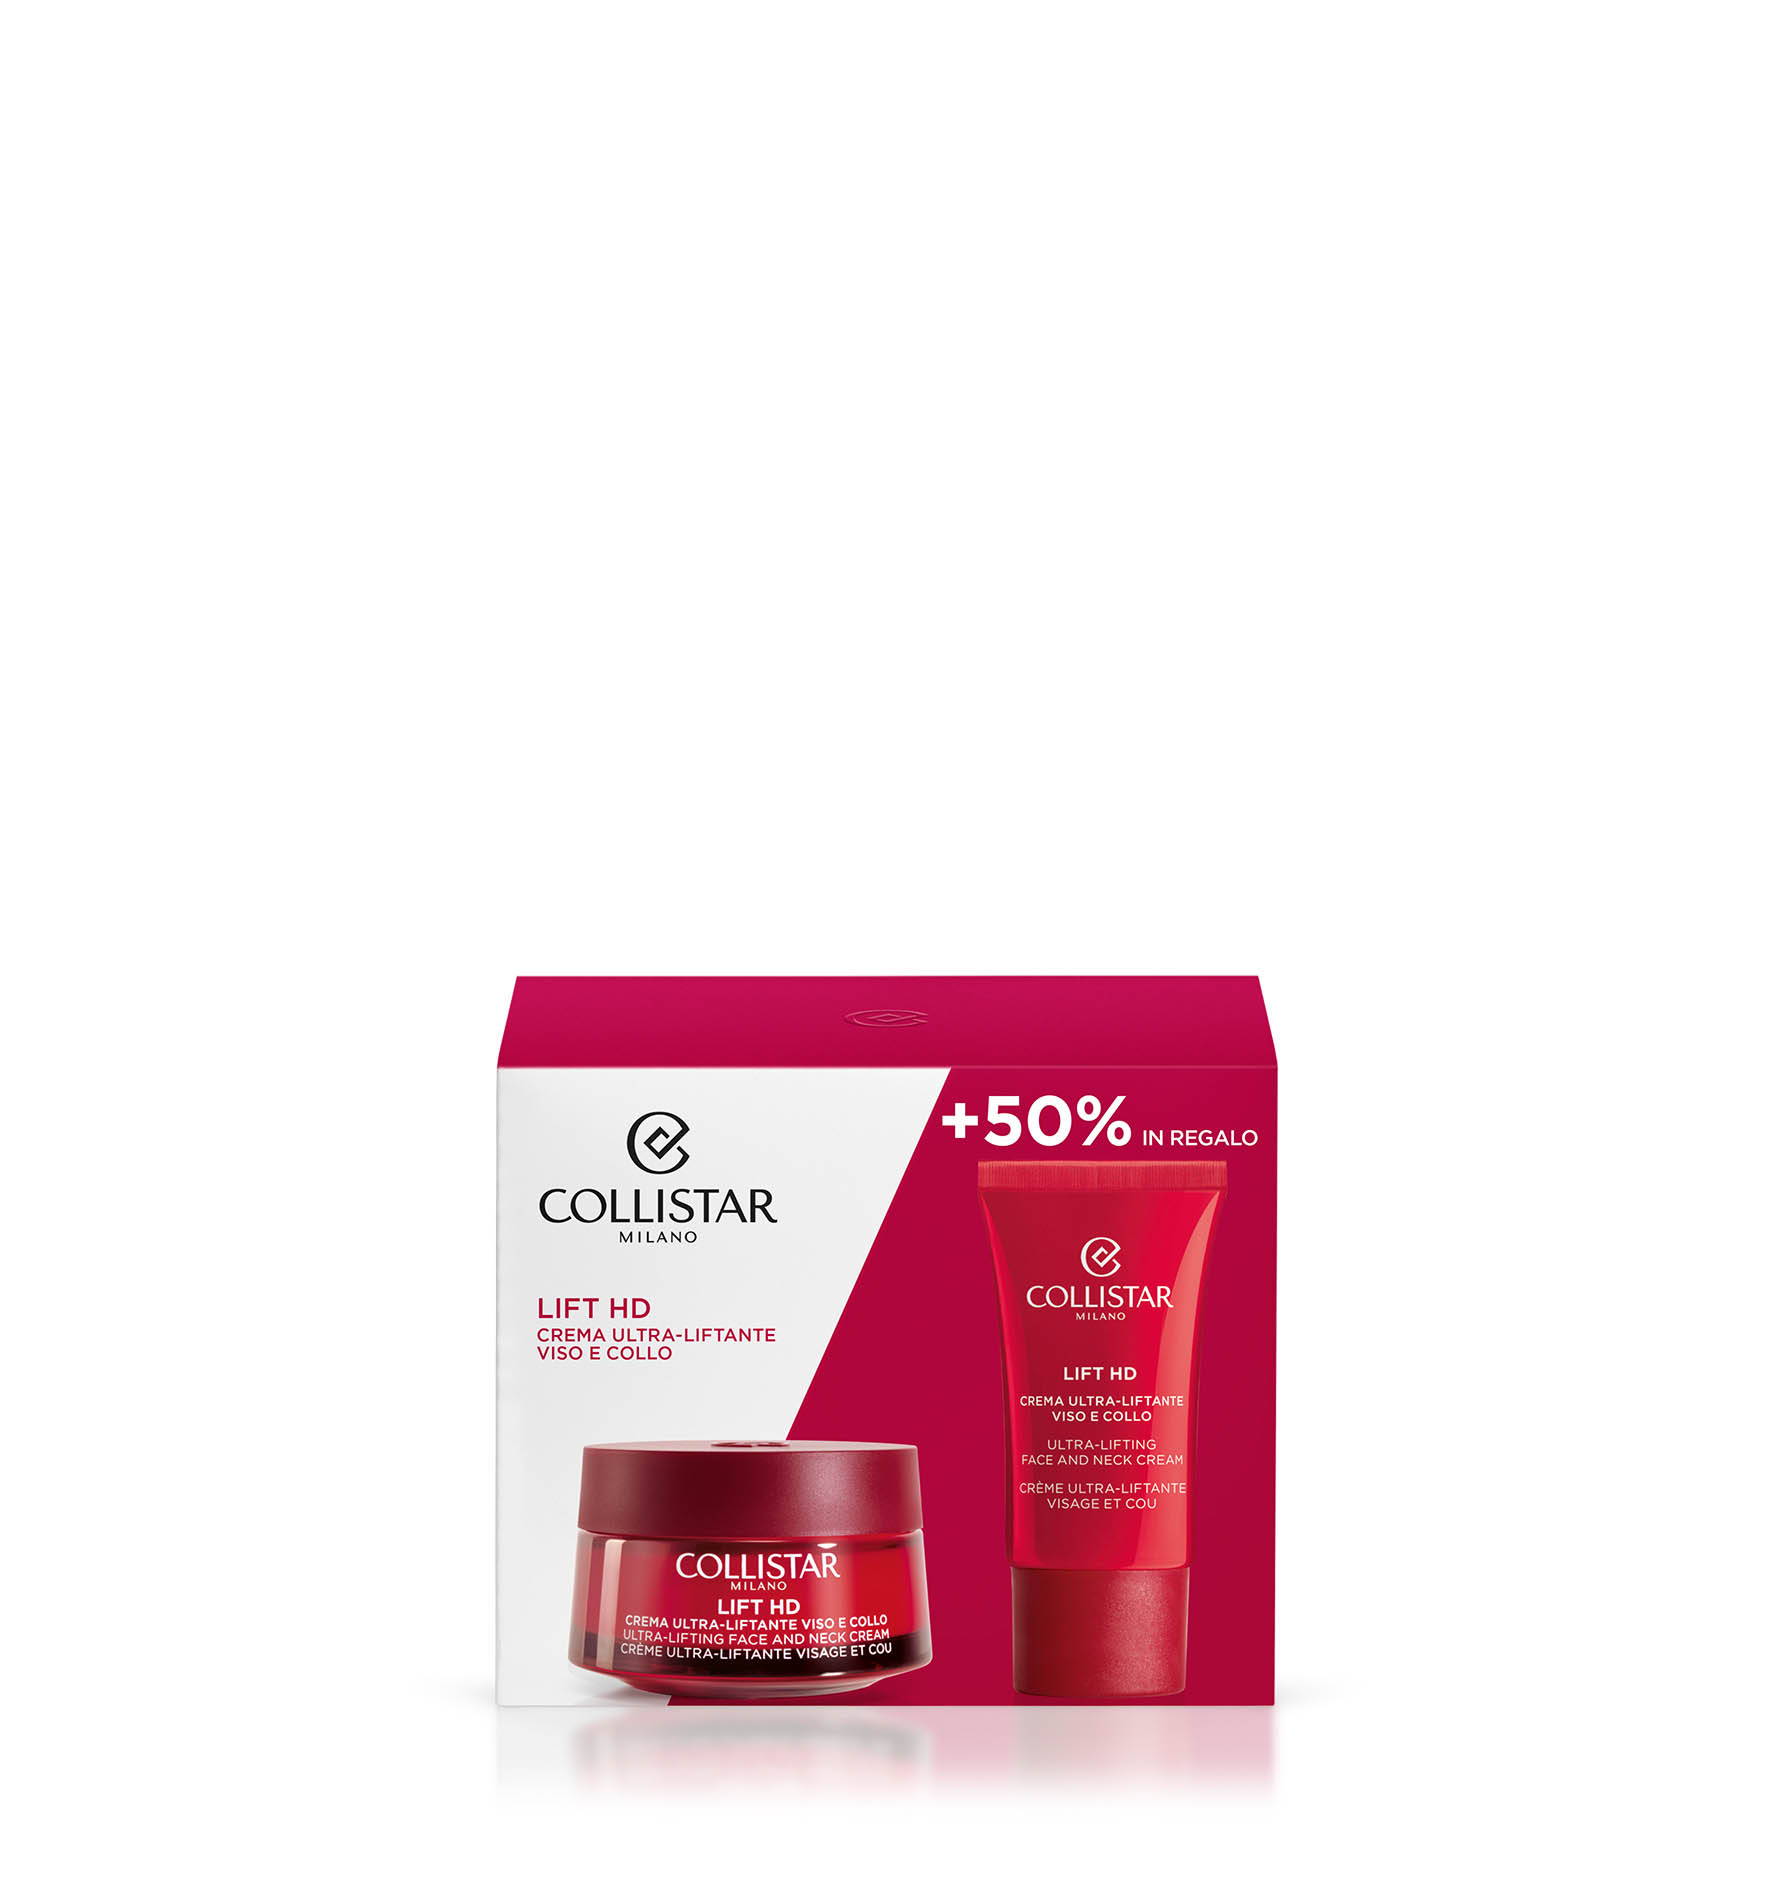 LIFT HD ULTRA-LIFTING FACE AND NECK CREAM 50 ml SET - PROMOTIONS | Collistar - Shop Online Ufficiale